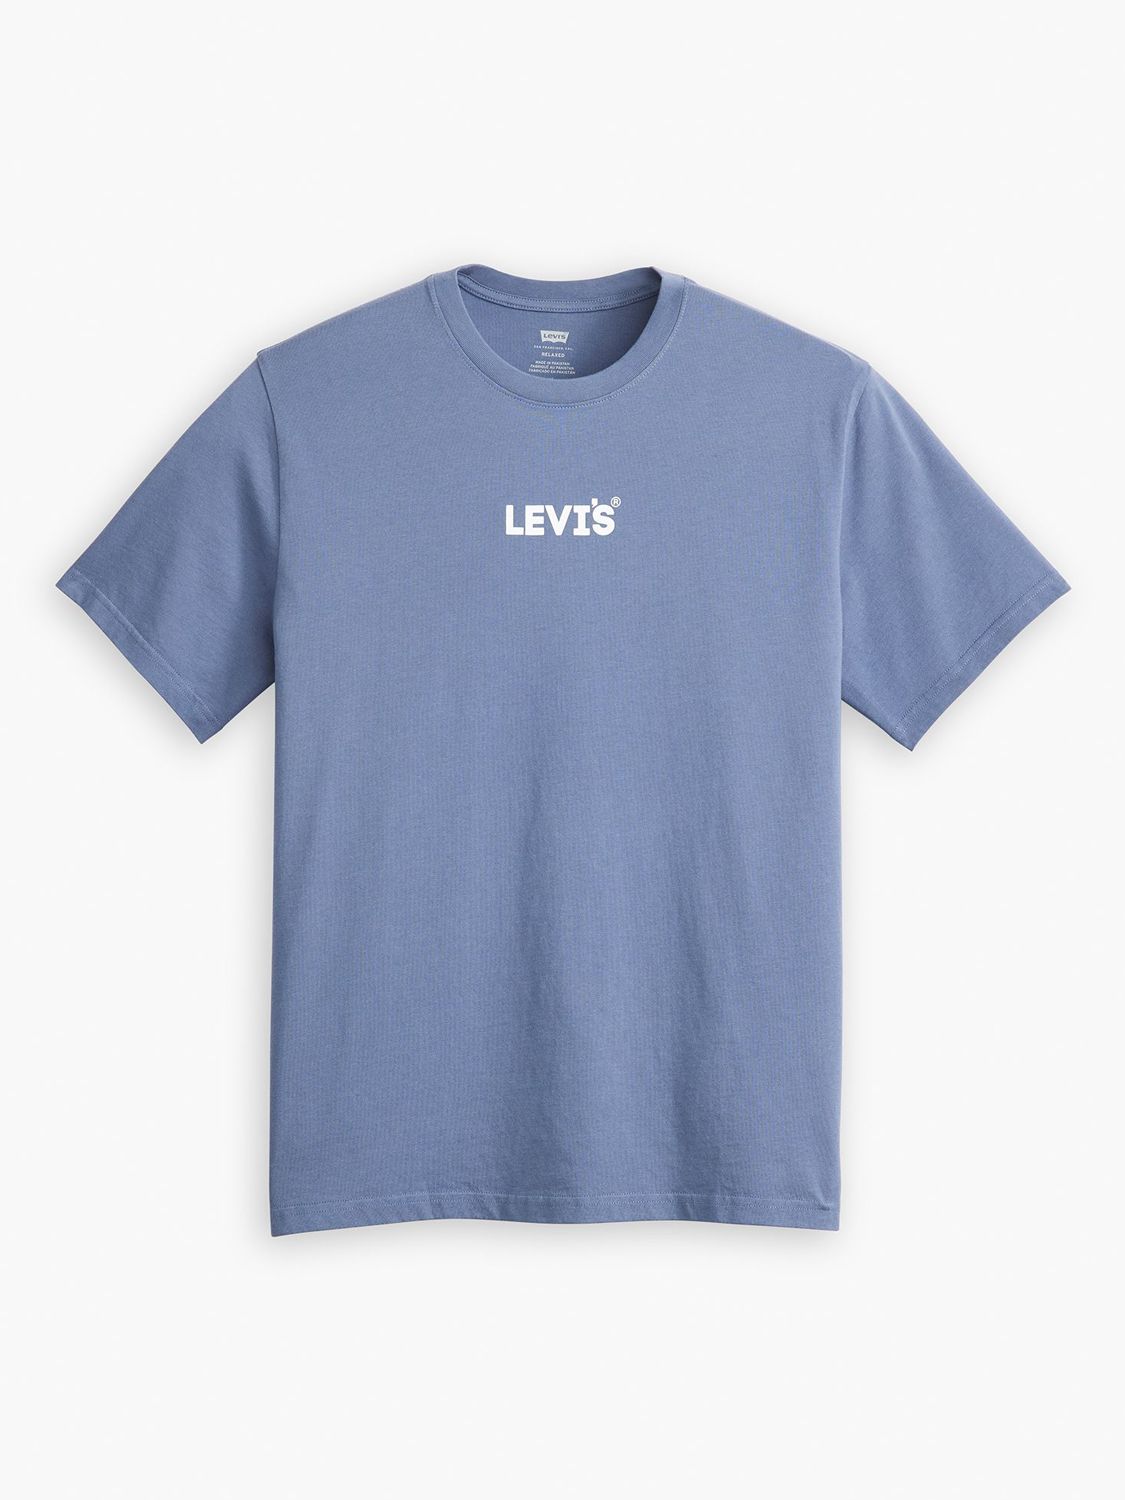 Levi's Short Sleeve Relaxed Fit T-Shirt, Vintage Indigo, S